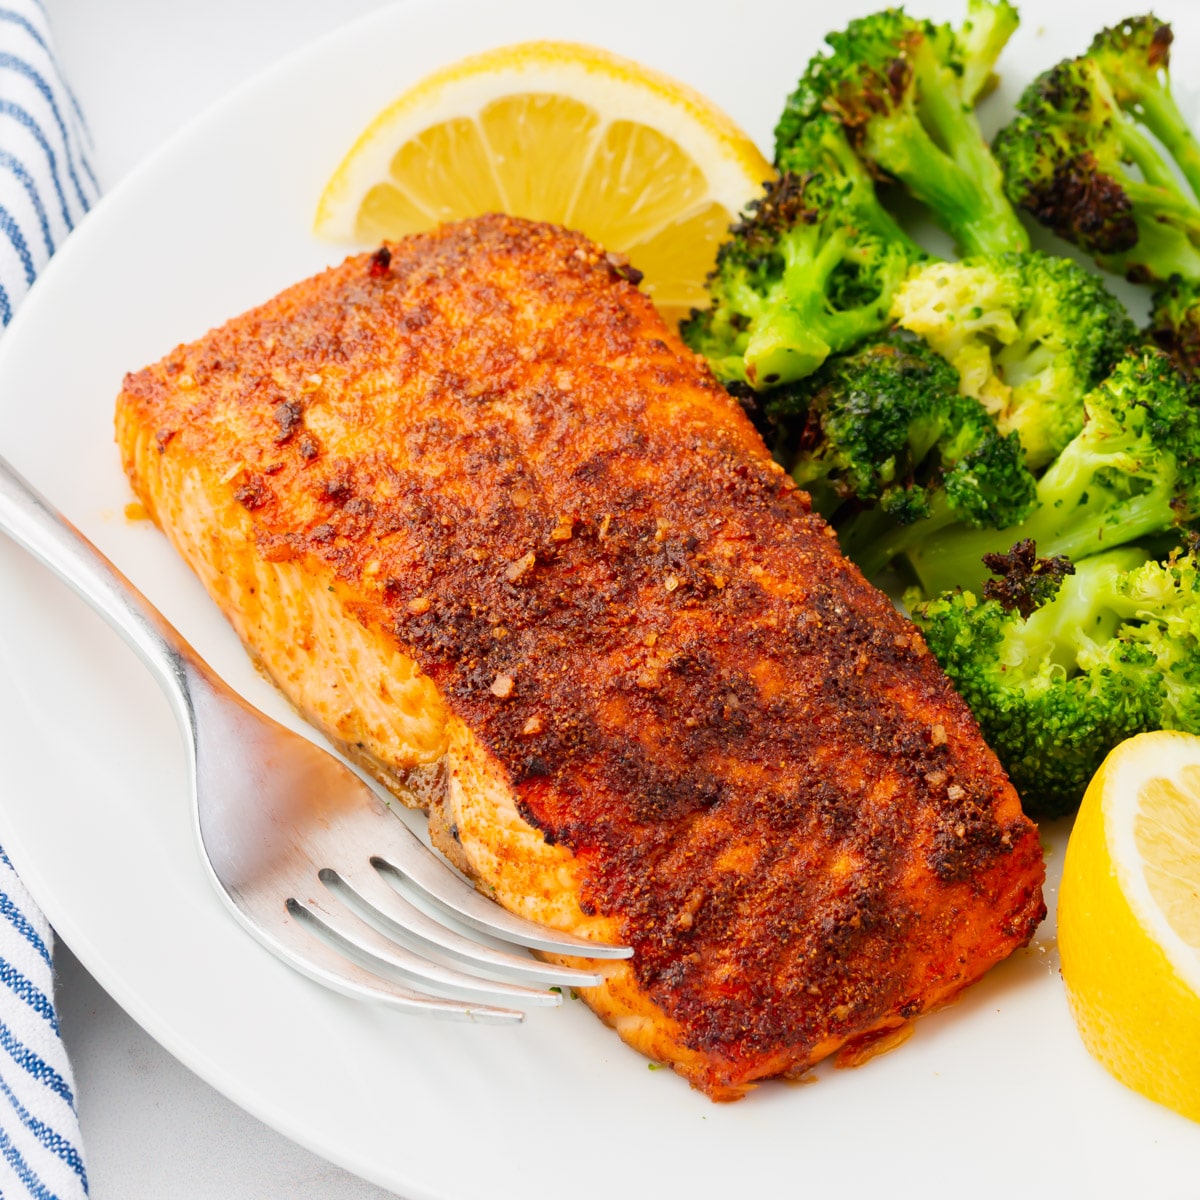 closeup of a pice of air fryer salmon on a plate with broccoli and lemon wedges